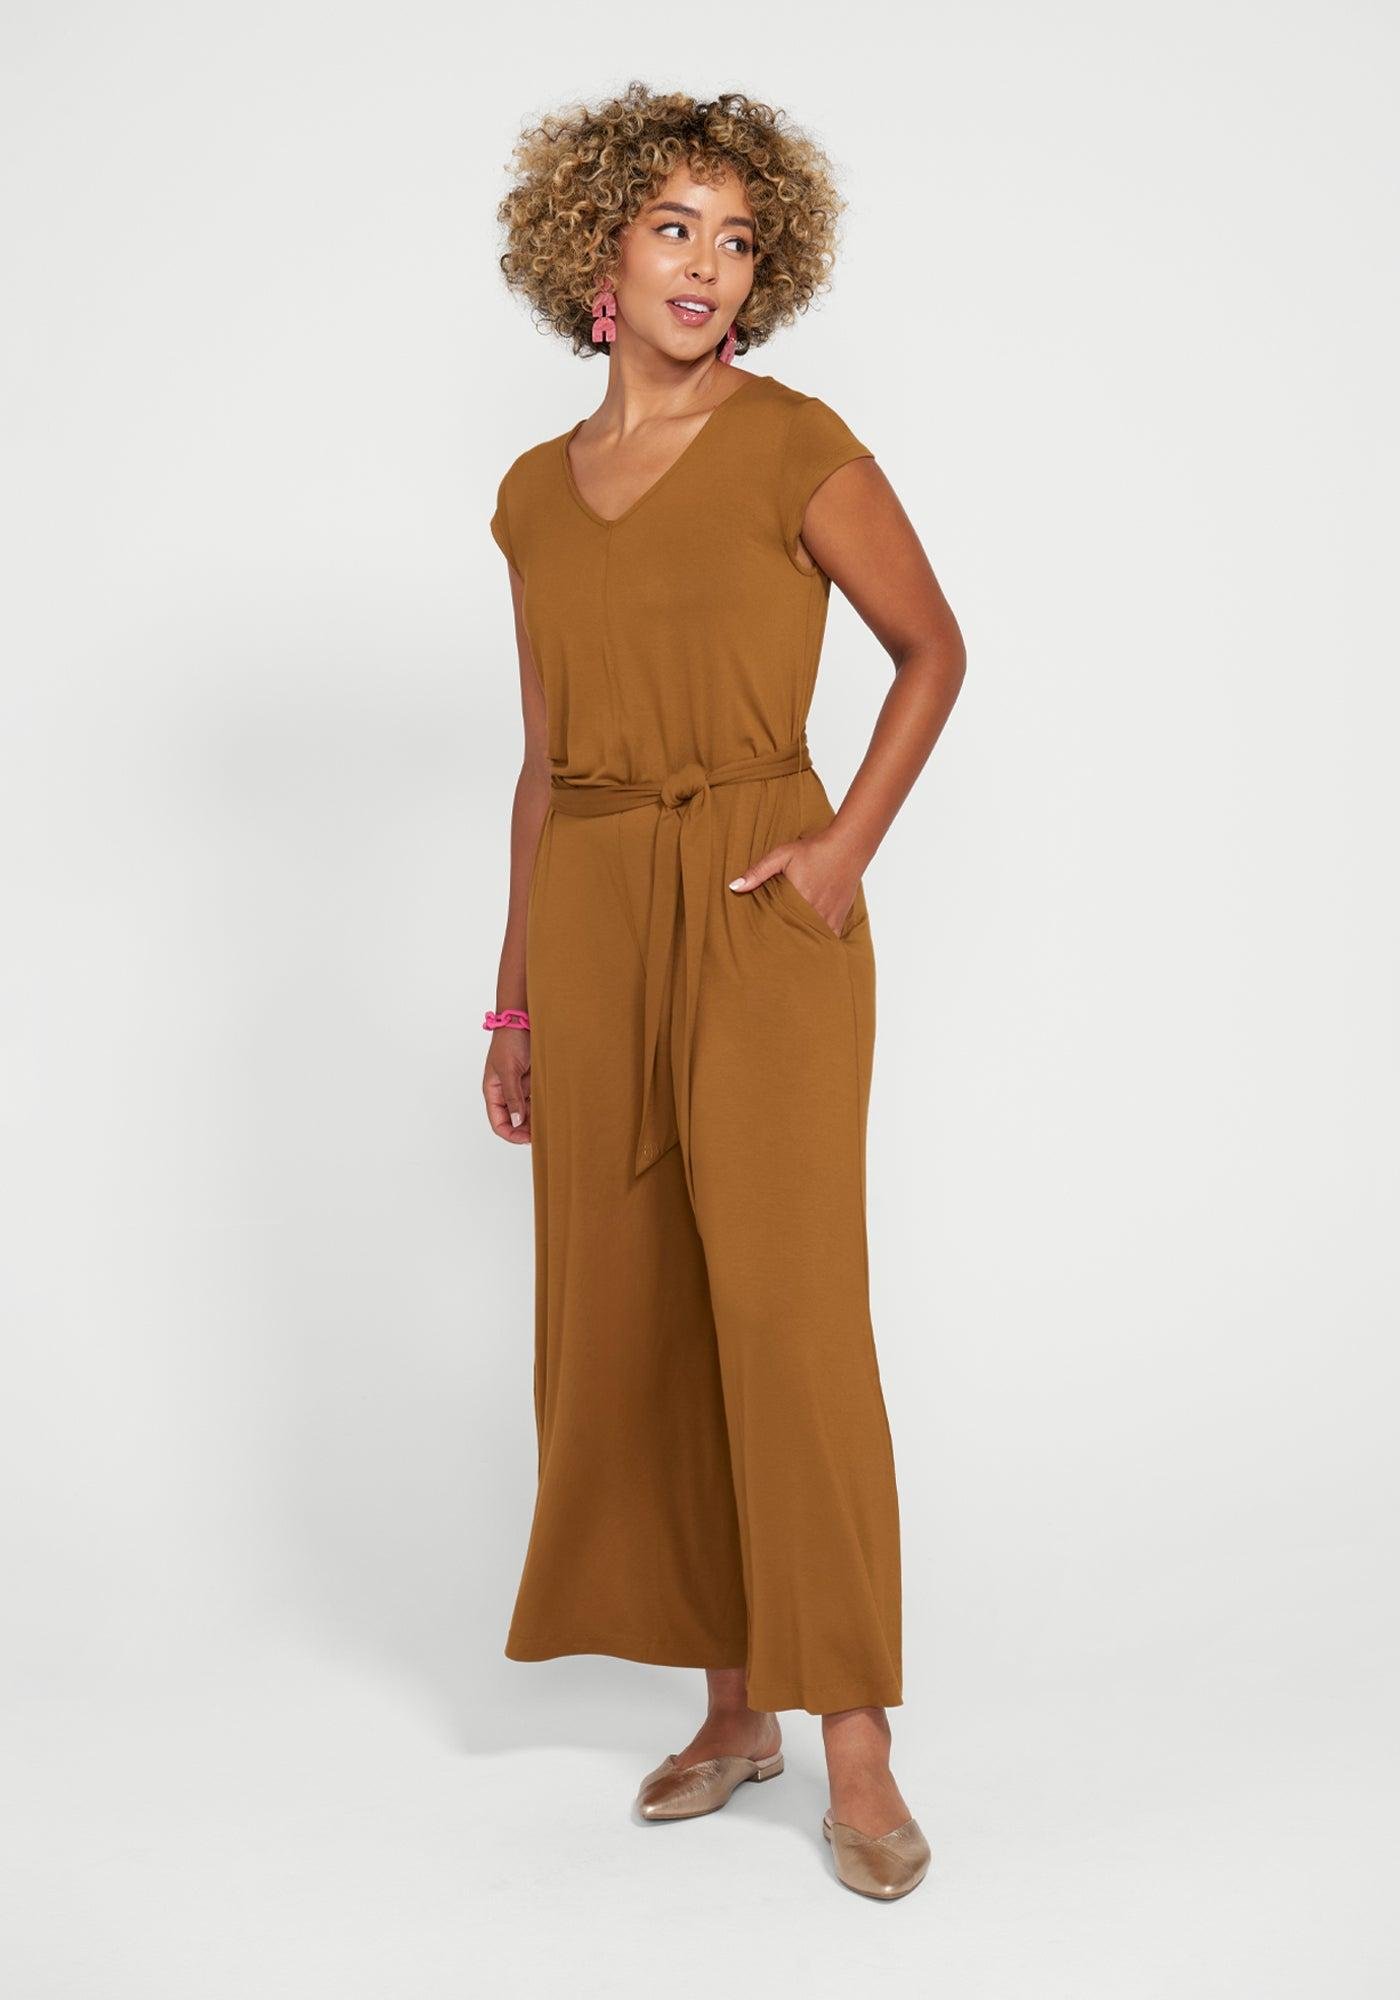 Betabrand Women's Day to Night Jumpsuit by BETABRAND